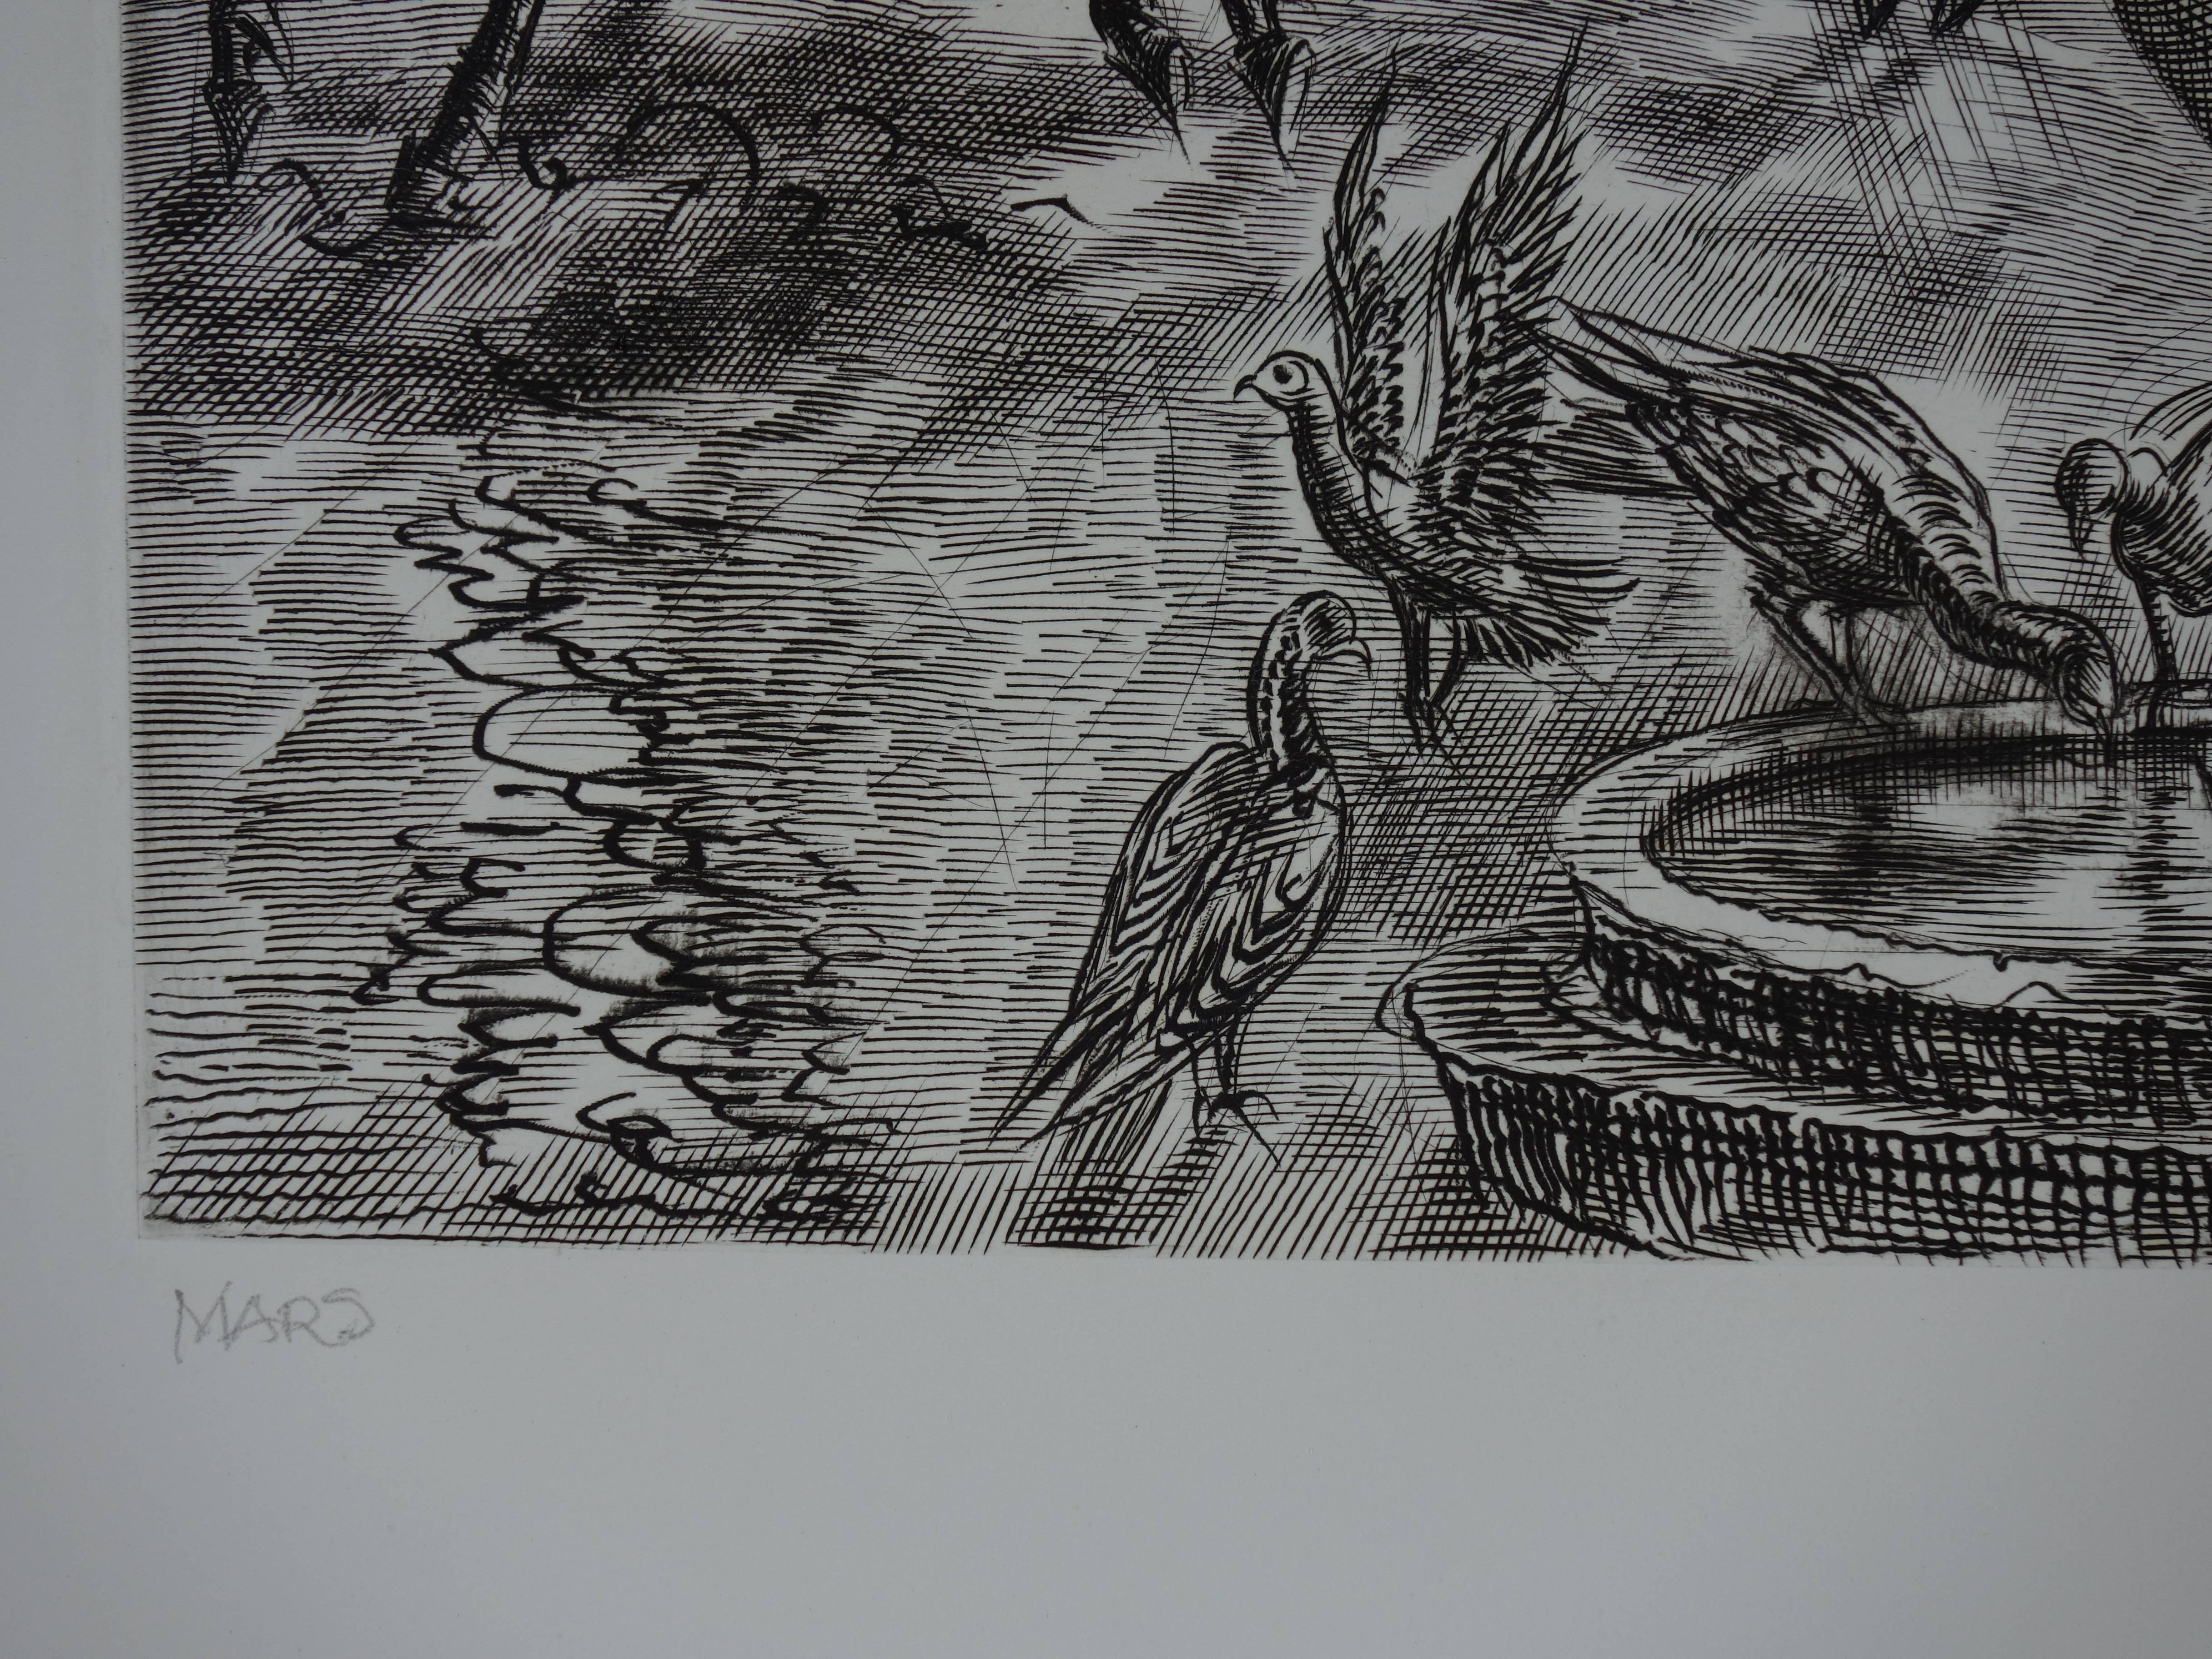 March : Last Fight of Winter - Original handsigned etching - Exceptional n°1/100 - Gray Figurative Print by Albert Decaris